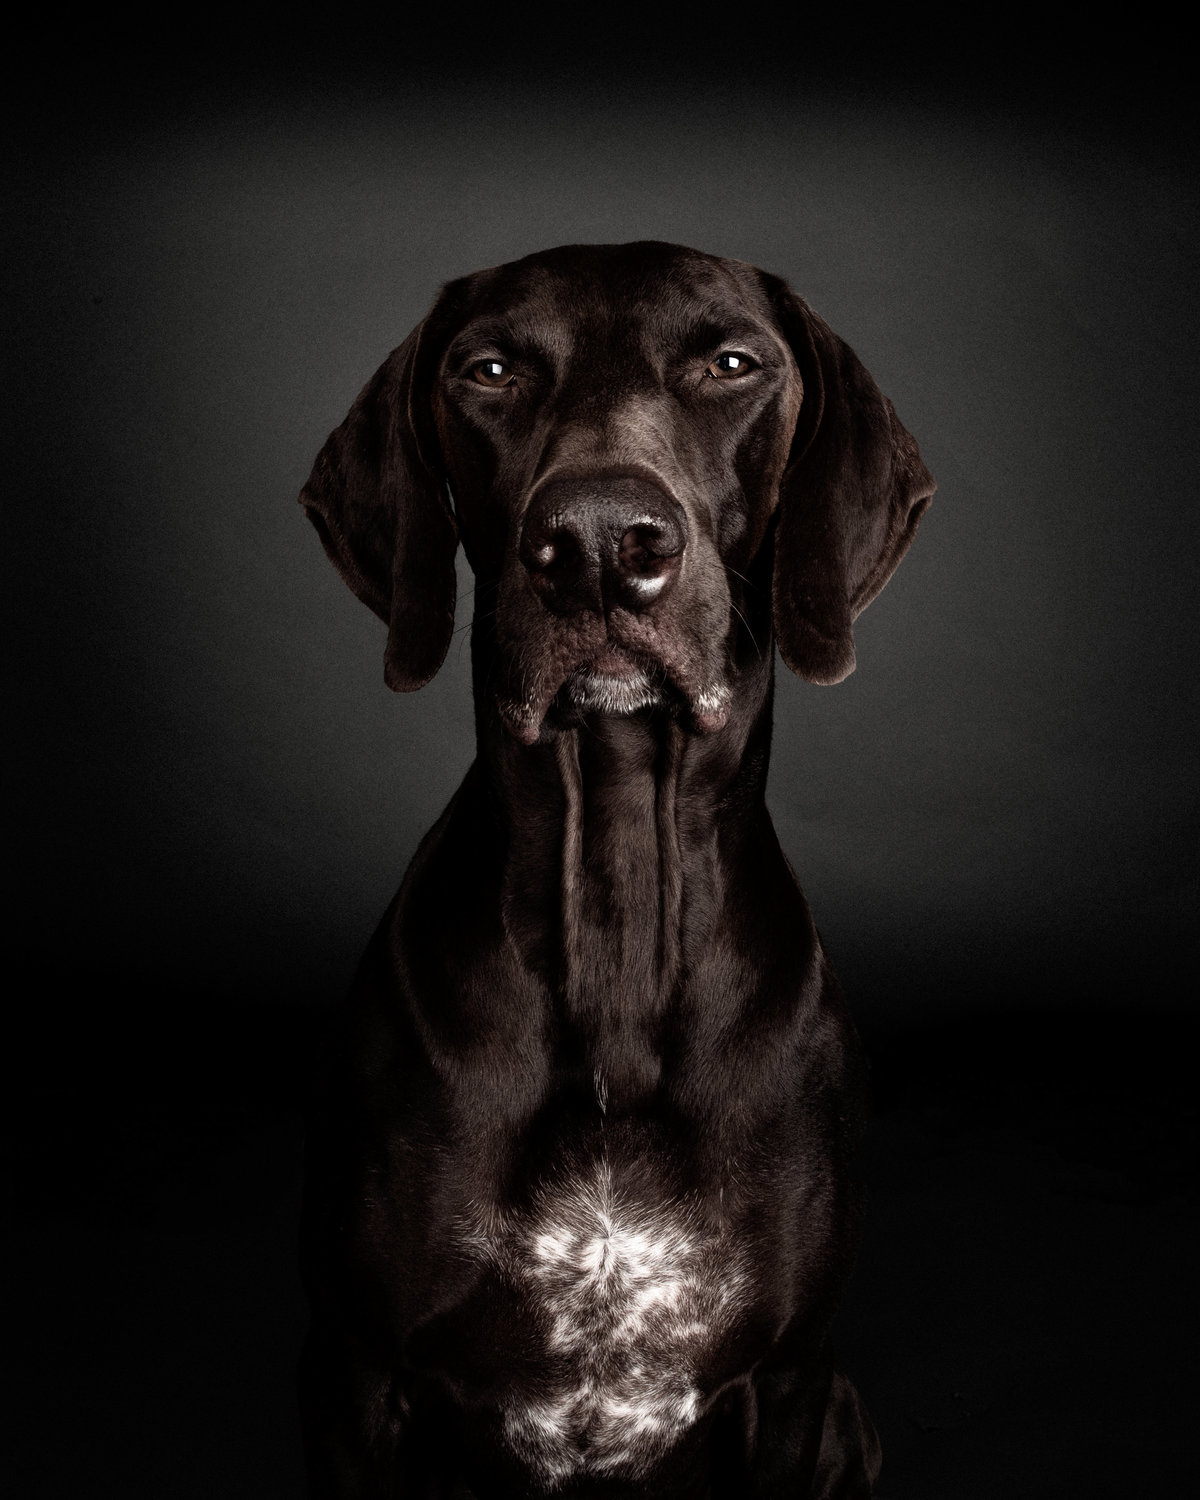 Big nose headshot of a very serious dog German Shorthaired Pointer on black background